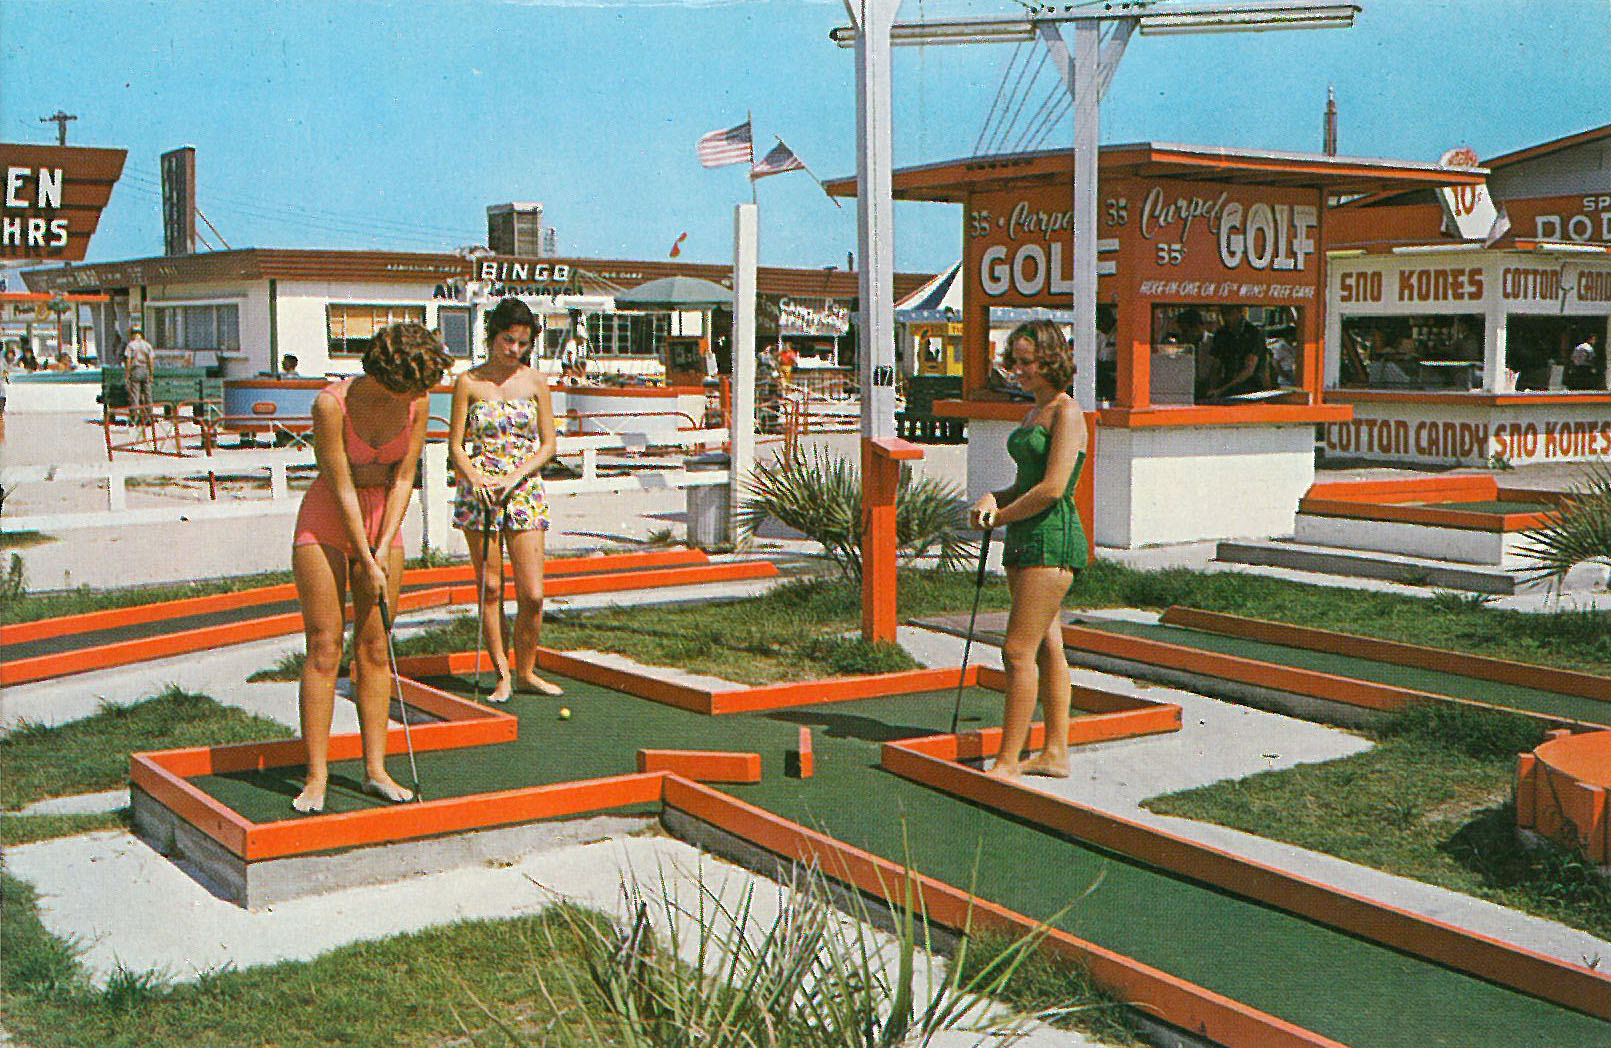 6. This image of people playing Carpet Golf